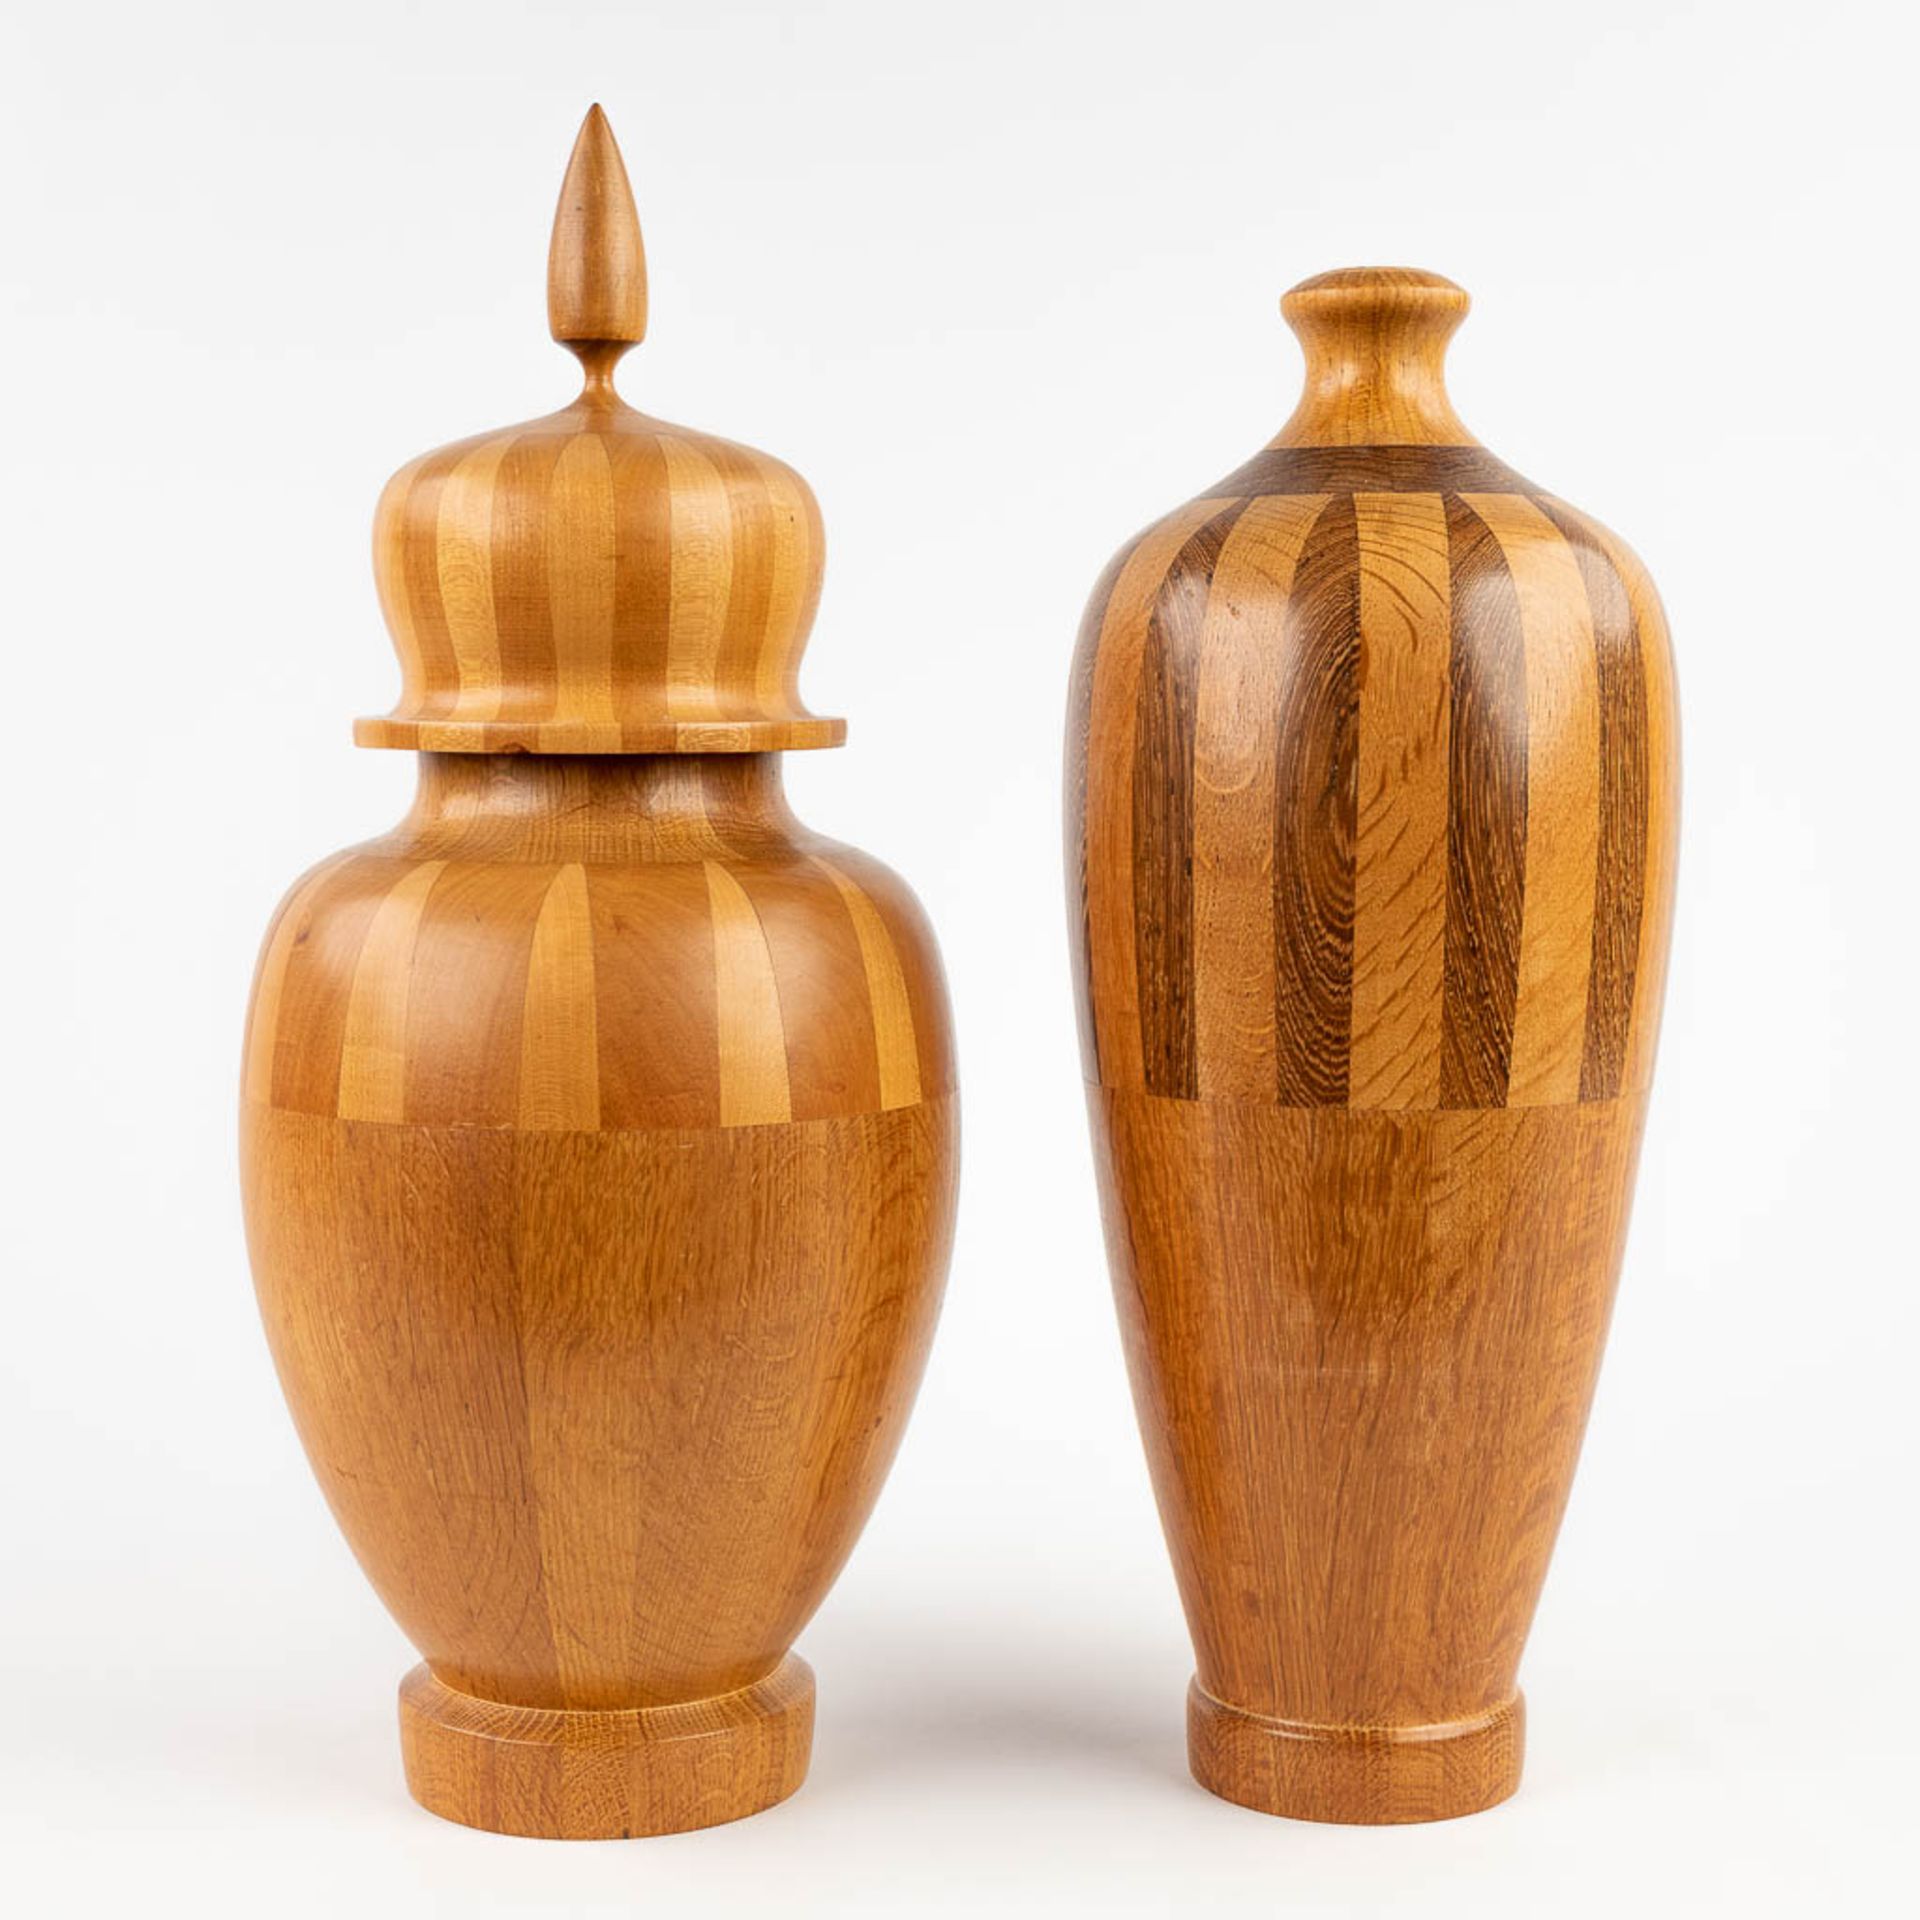 A collection of 2 wood-turned vases, made of wood. circa 1960. (H: 43 x D: 16 cm) - Image 3 of 11